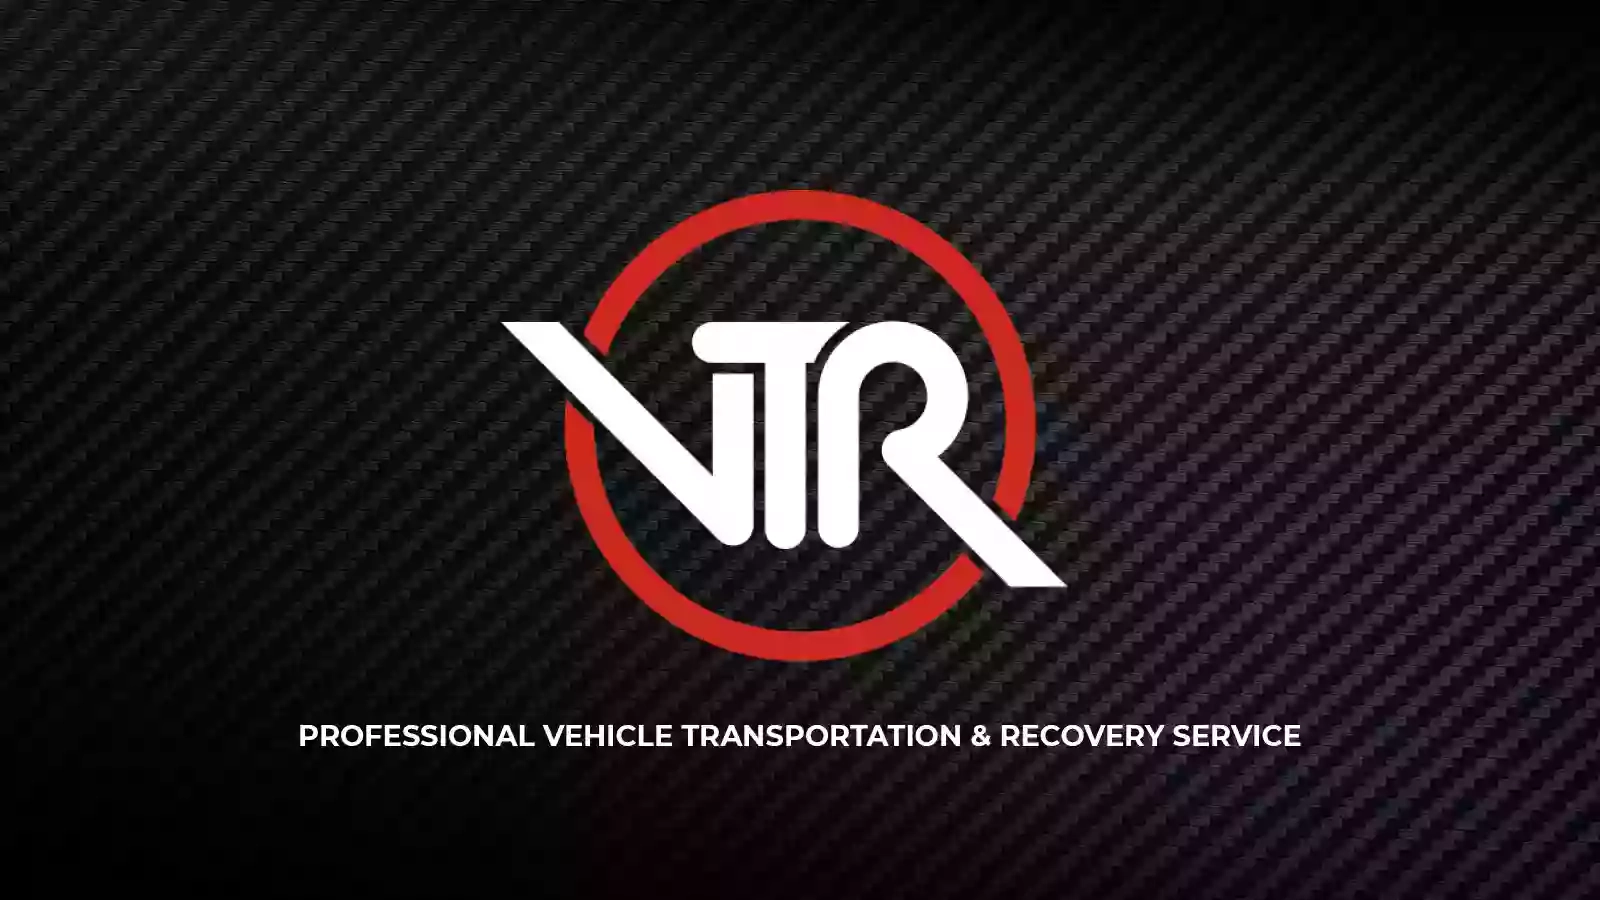 VTR (Vehicle Transport & Recovery)